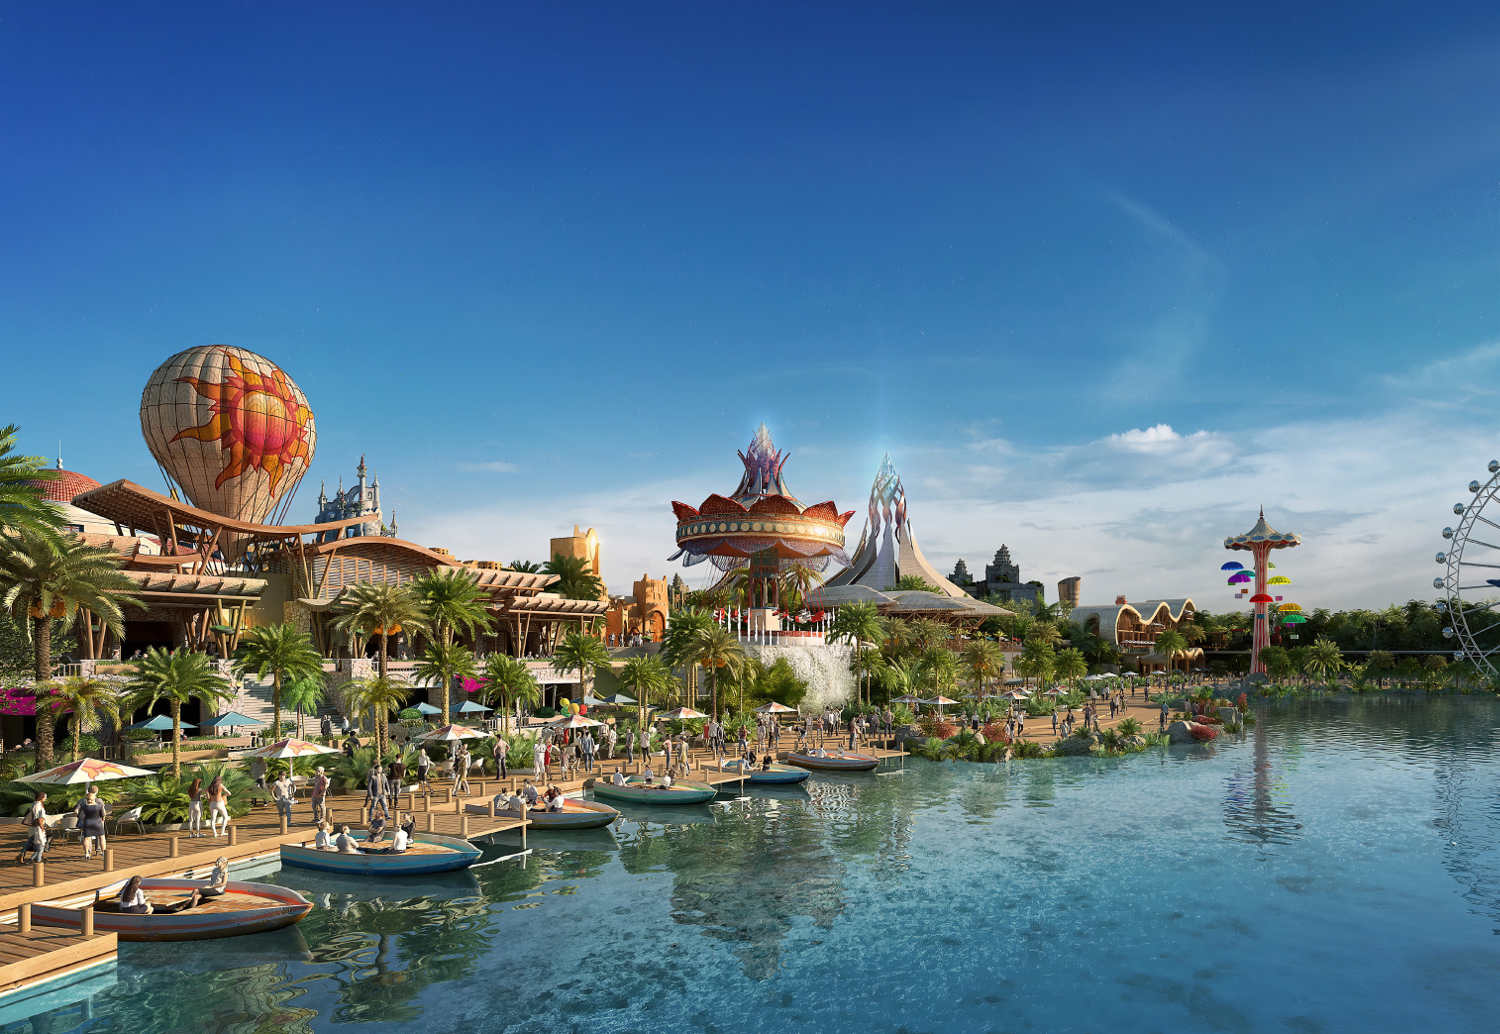 This is another of many announcements from Cirque du Soleil and Grupo Vidanta about plans to open a new show and construction of a new dinner theater for 600 person.  Very unique... - 12/3/19